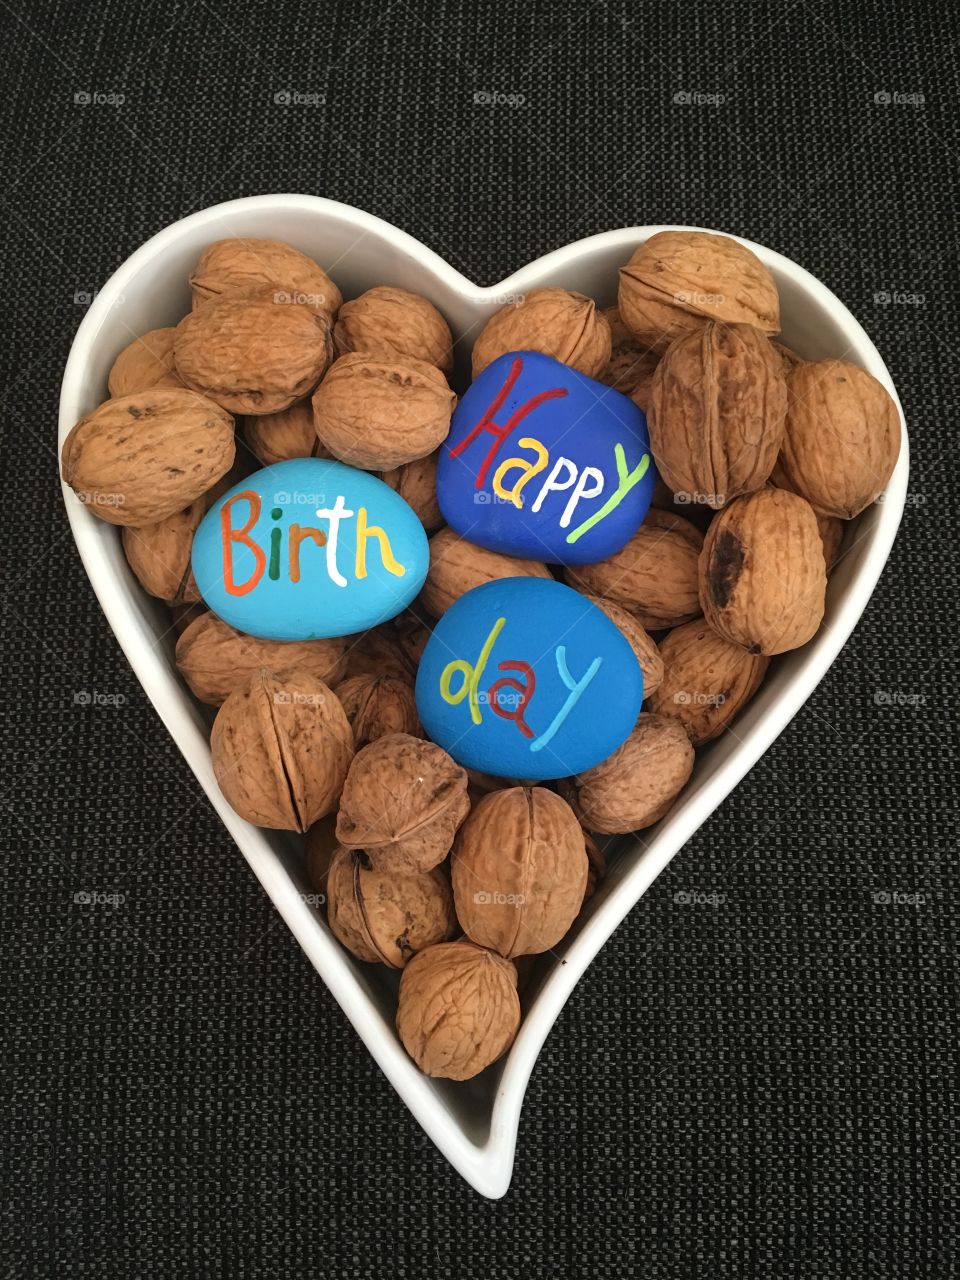 Happy Birthday message with stones on walnuts 